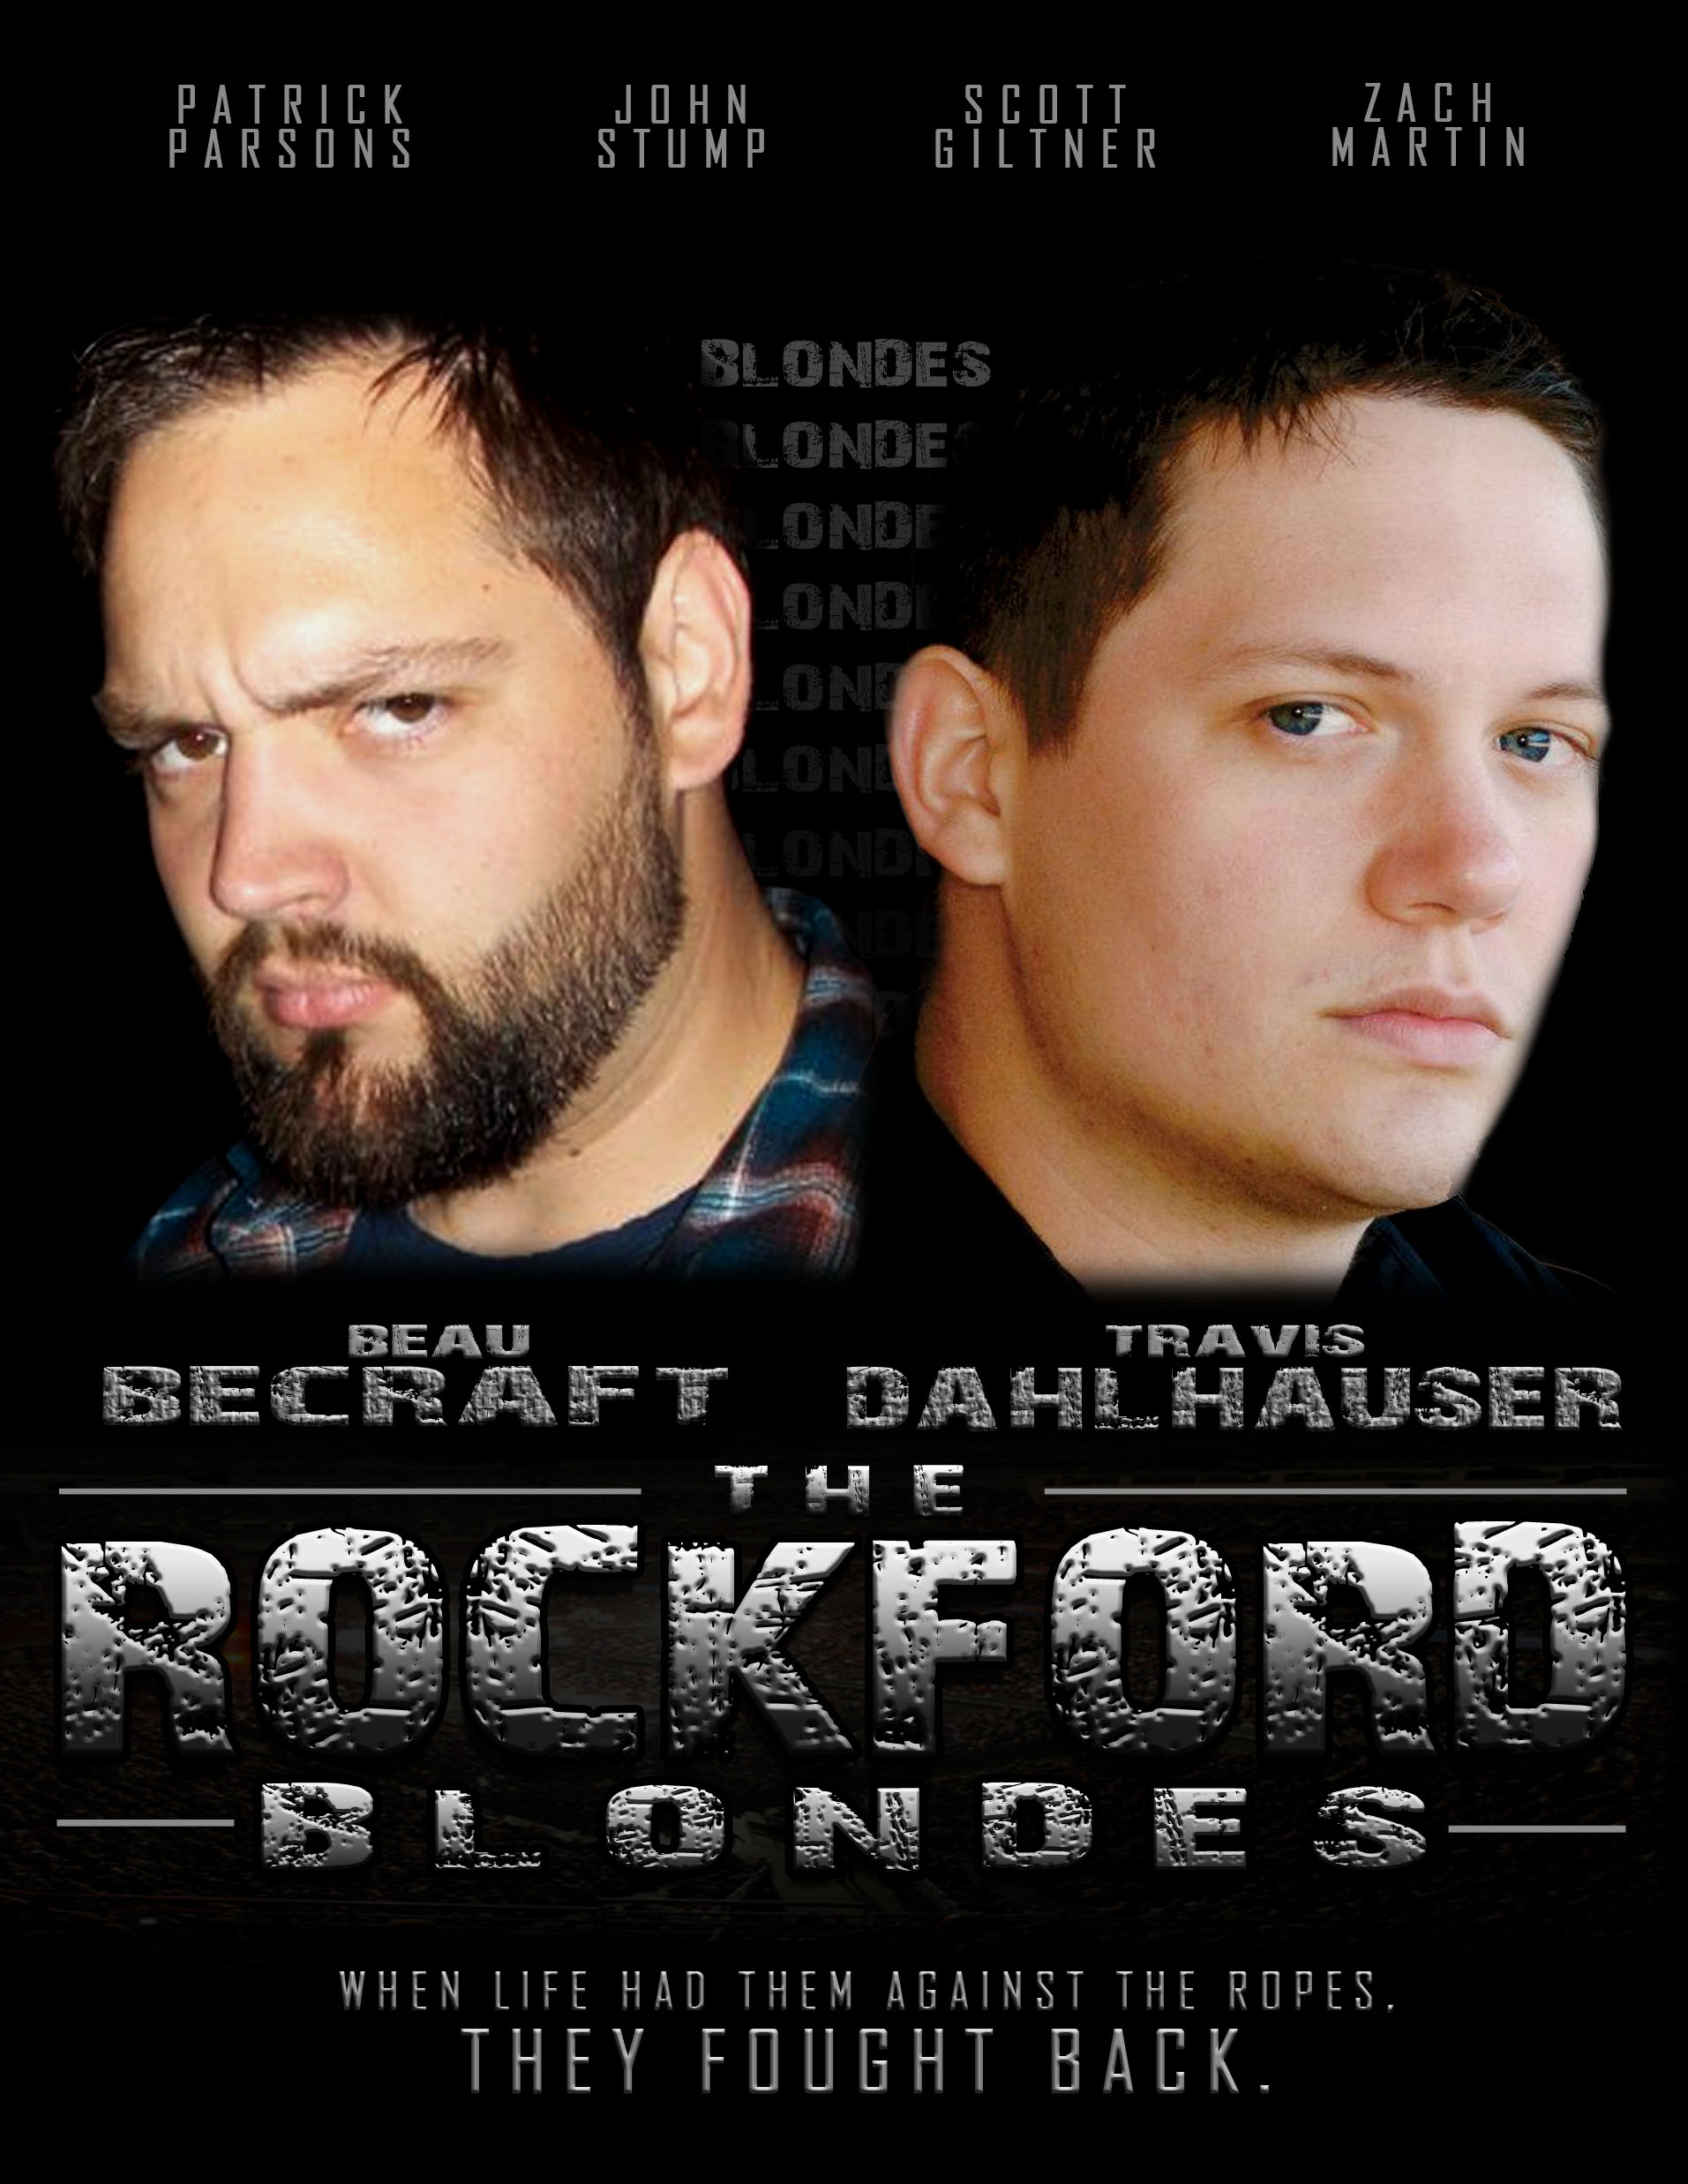 Official poster for The Rockford Blondes